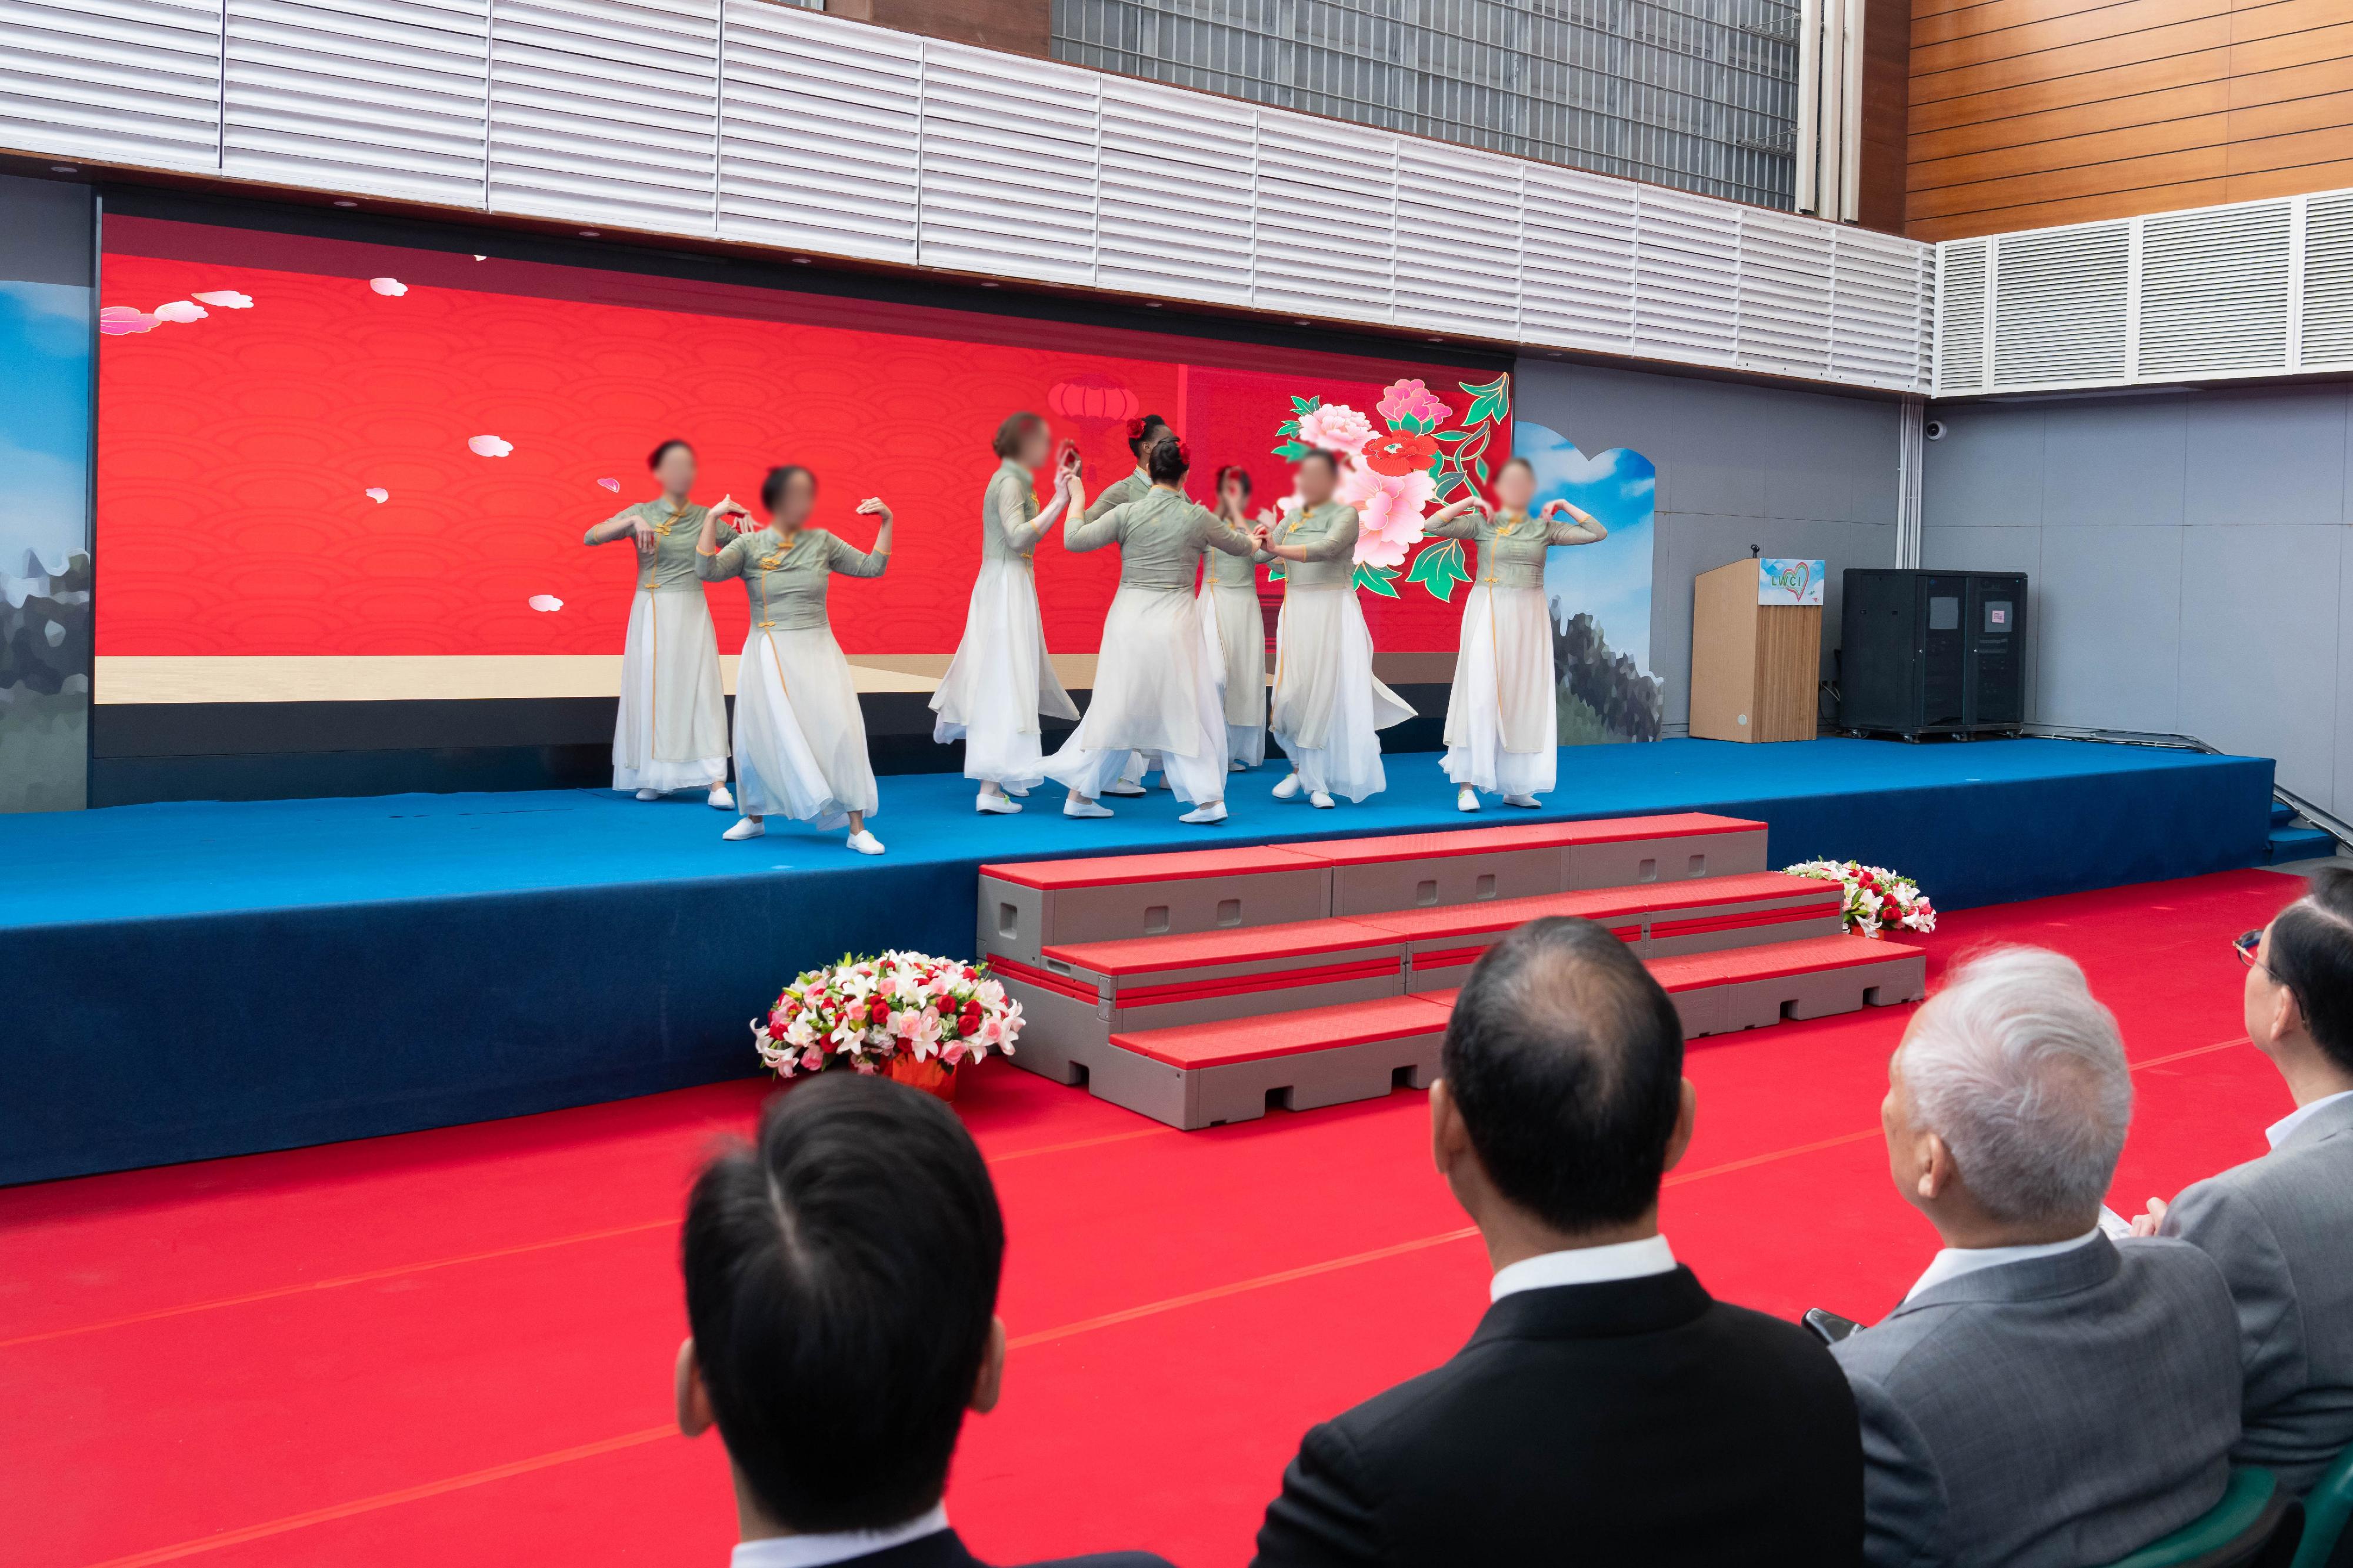 Persons in custody at Lo Wu Correctional Institution of the Correctional Services Department were presented with certificates at a ceremony today (March 20) in recognition of their continuous efforts in pursuing further studies. Photo shows persons in custody performing in a music and dance drama.